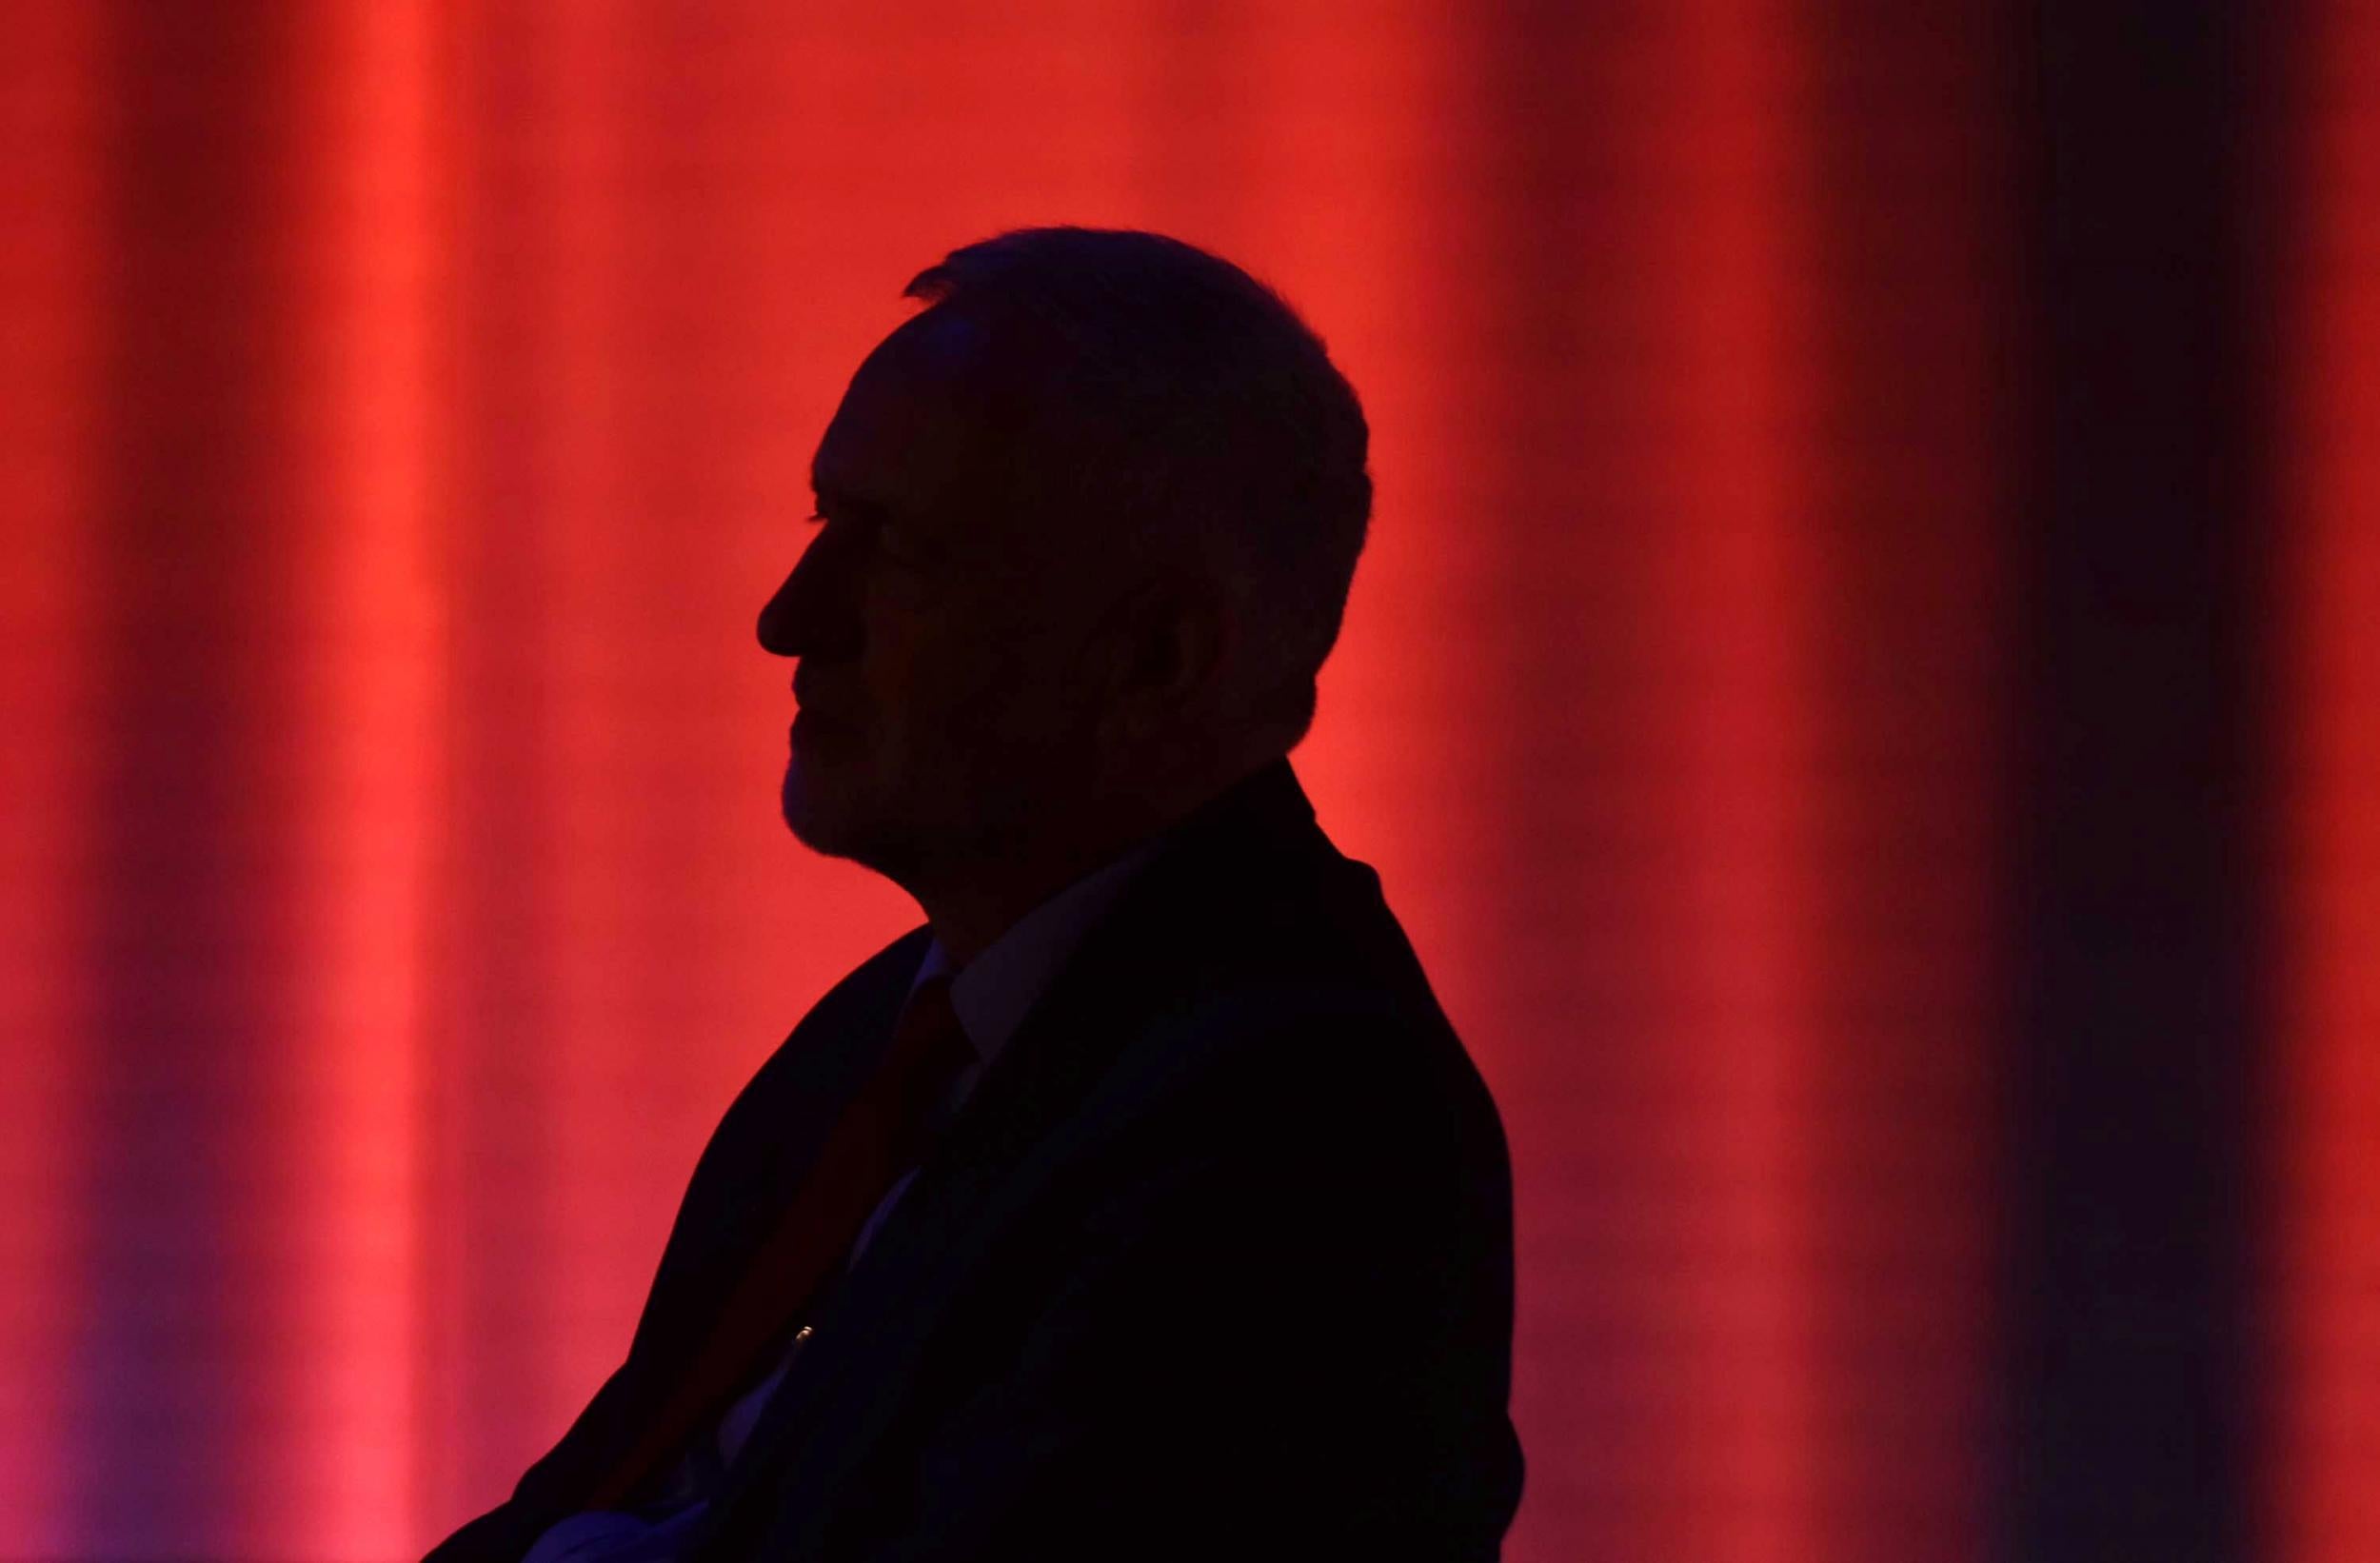 The Labour Party's contradicting proclamations about Brexit have left many in the dark